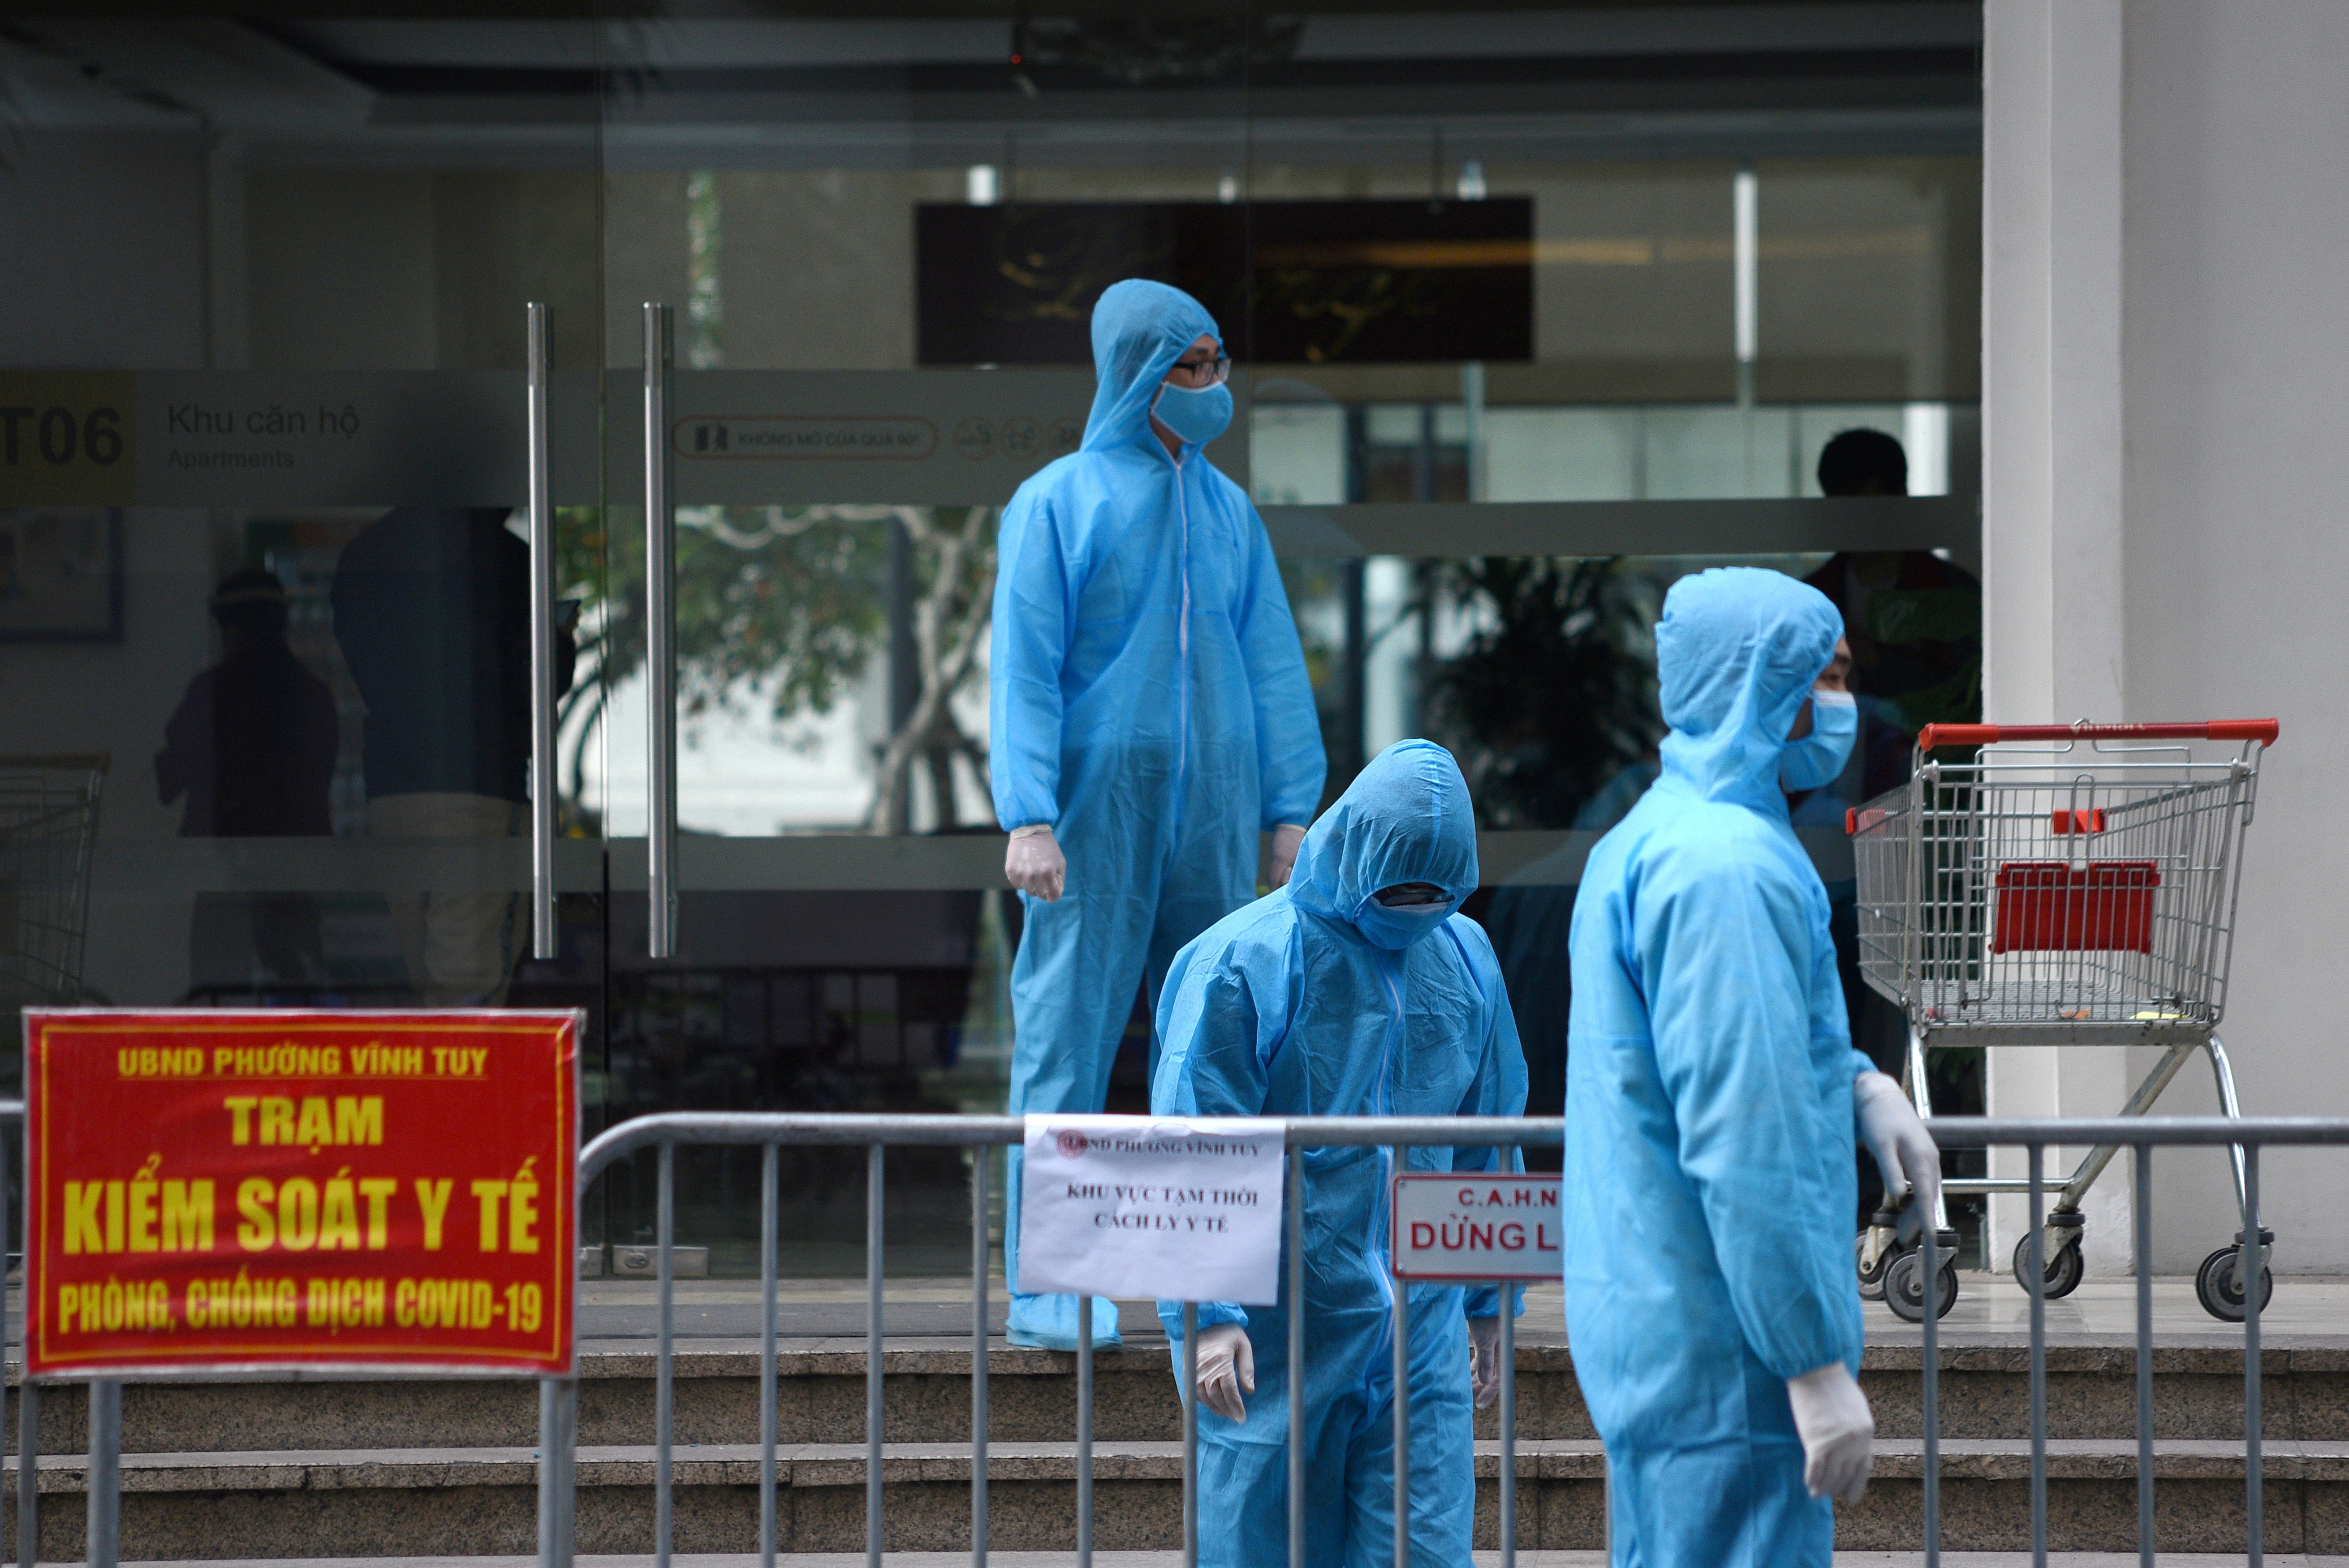 IFILE PHOTO: Medical workers in protective suits stand outside a quarantined building amid the coronavirus disease outbreak in Hanoi